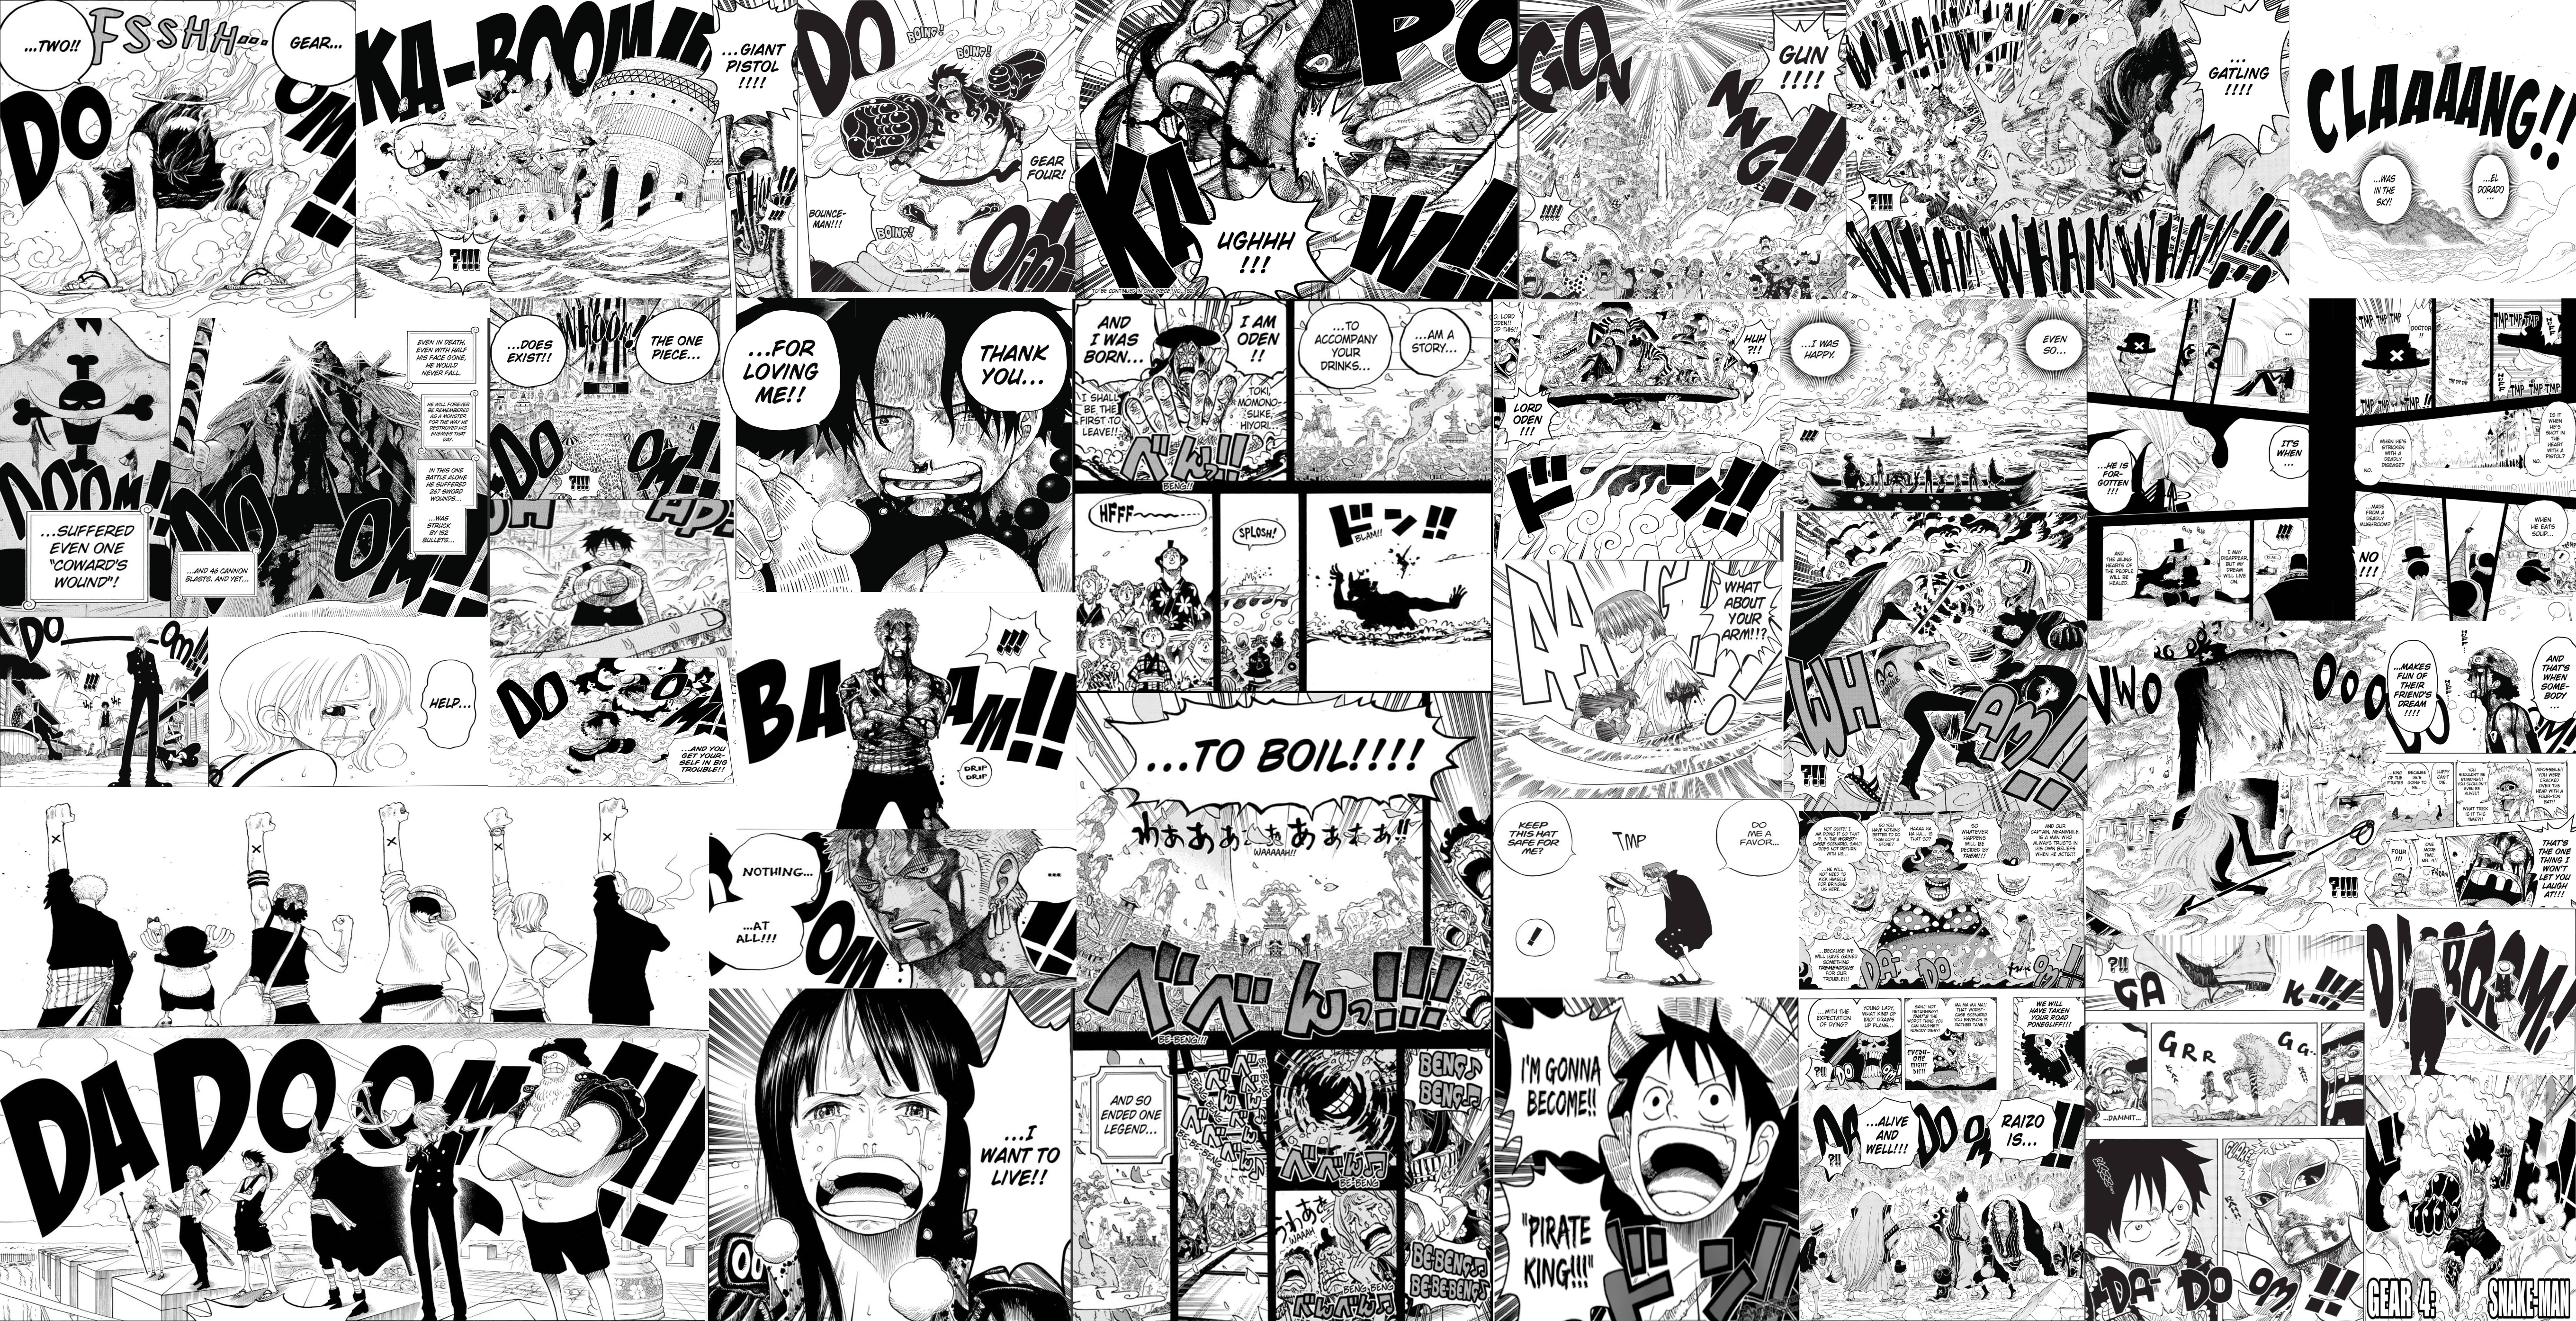 I Made Collage Of My Favorite Most Iconic Manga Panels For My Computer's Background